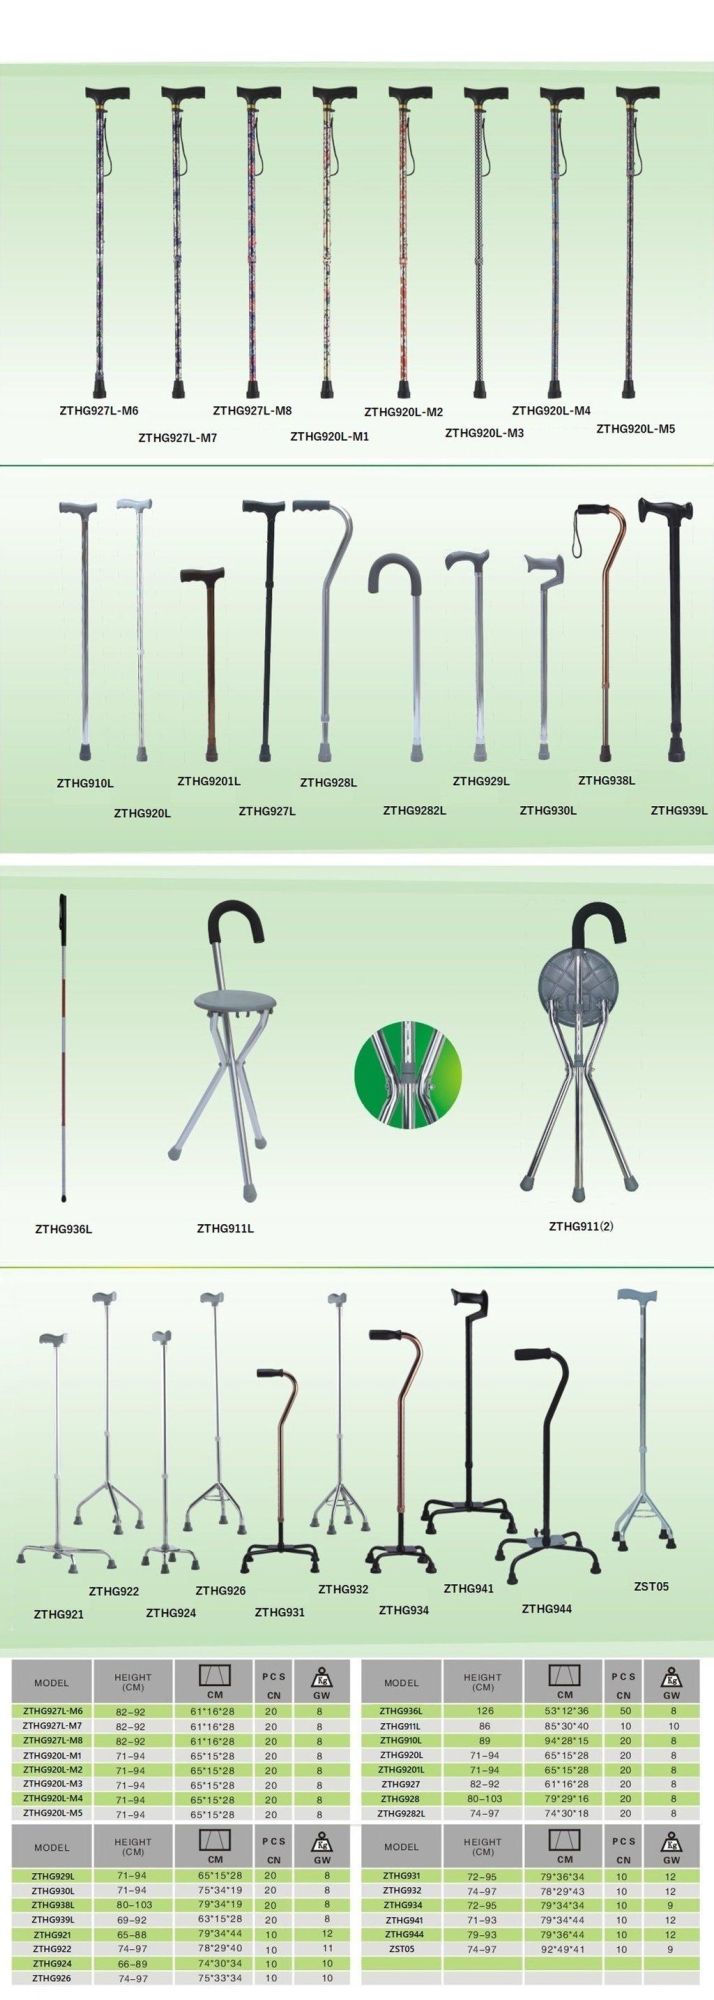 Antiskid Adjustable Height Colorful Elderly People Outdoor Easy Carry Crutch Aluminum PVC Hand Grip Walking Stick Home Care Rehabilitation Products Cane